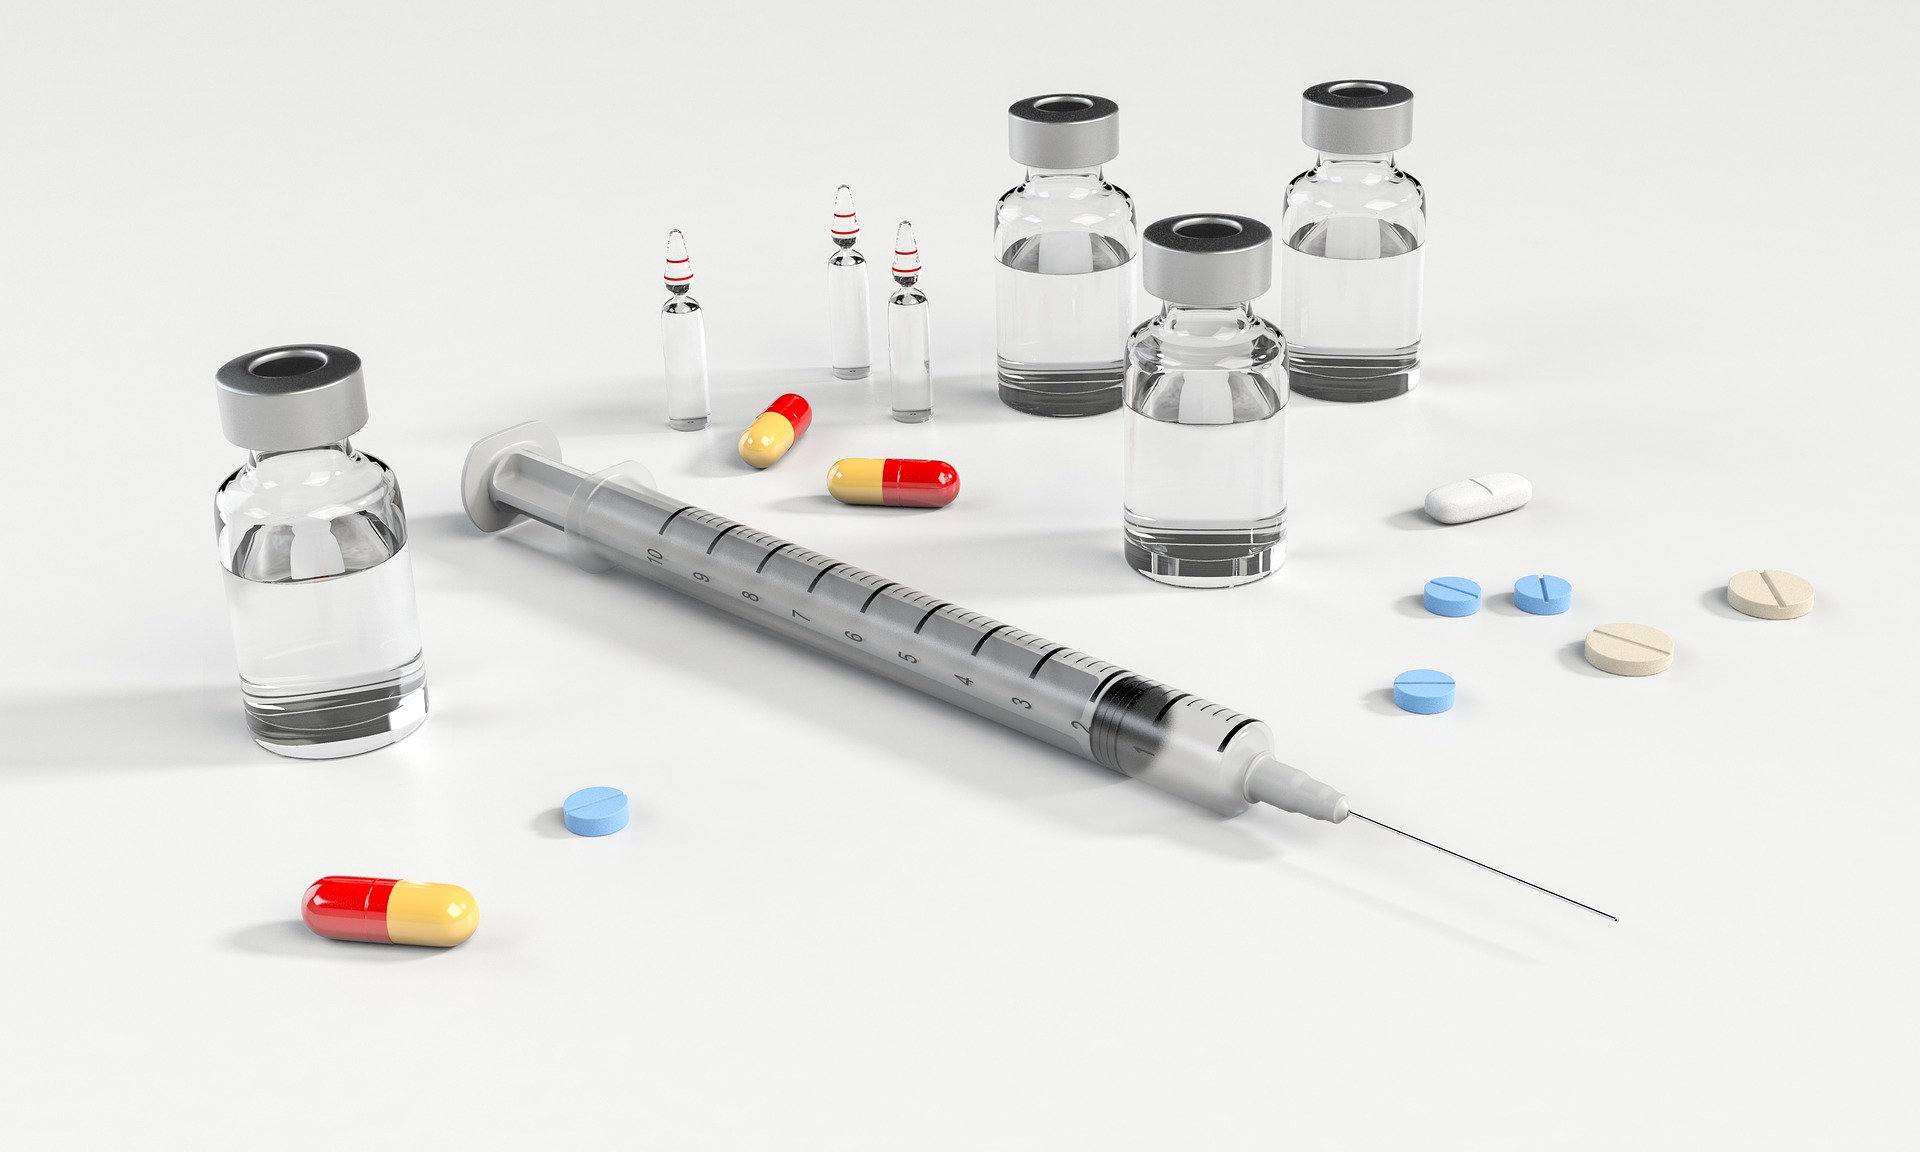 A picture of various pharmaceuticals and syringe that could be used to compound bulk substances